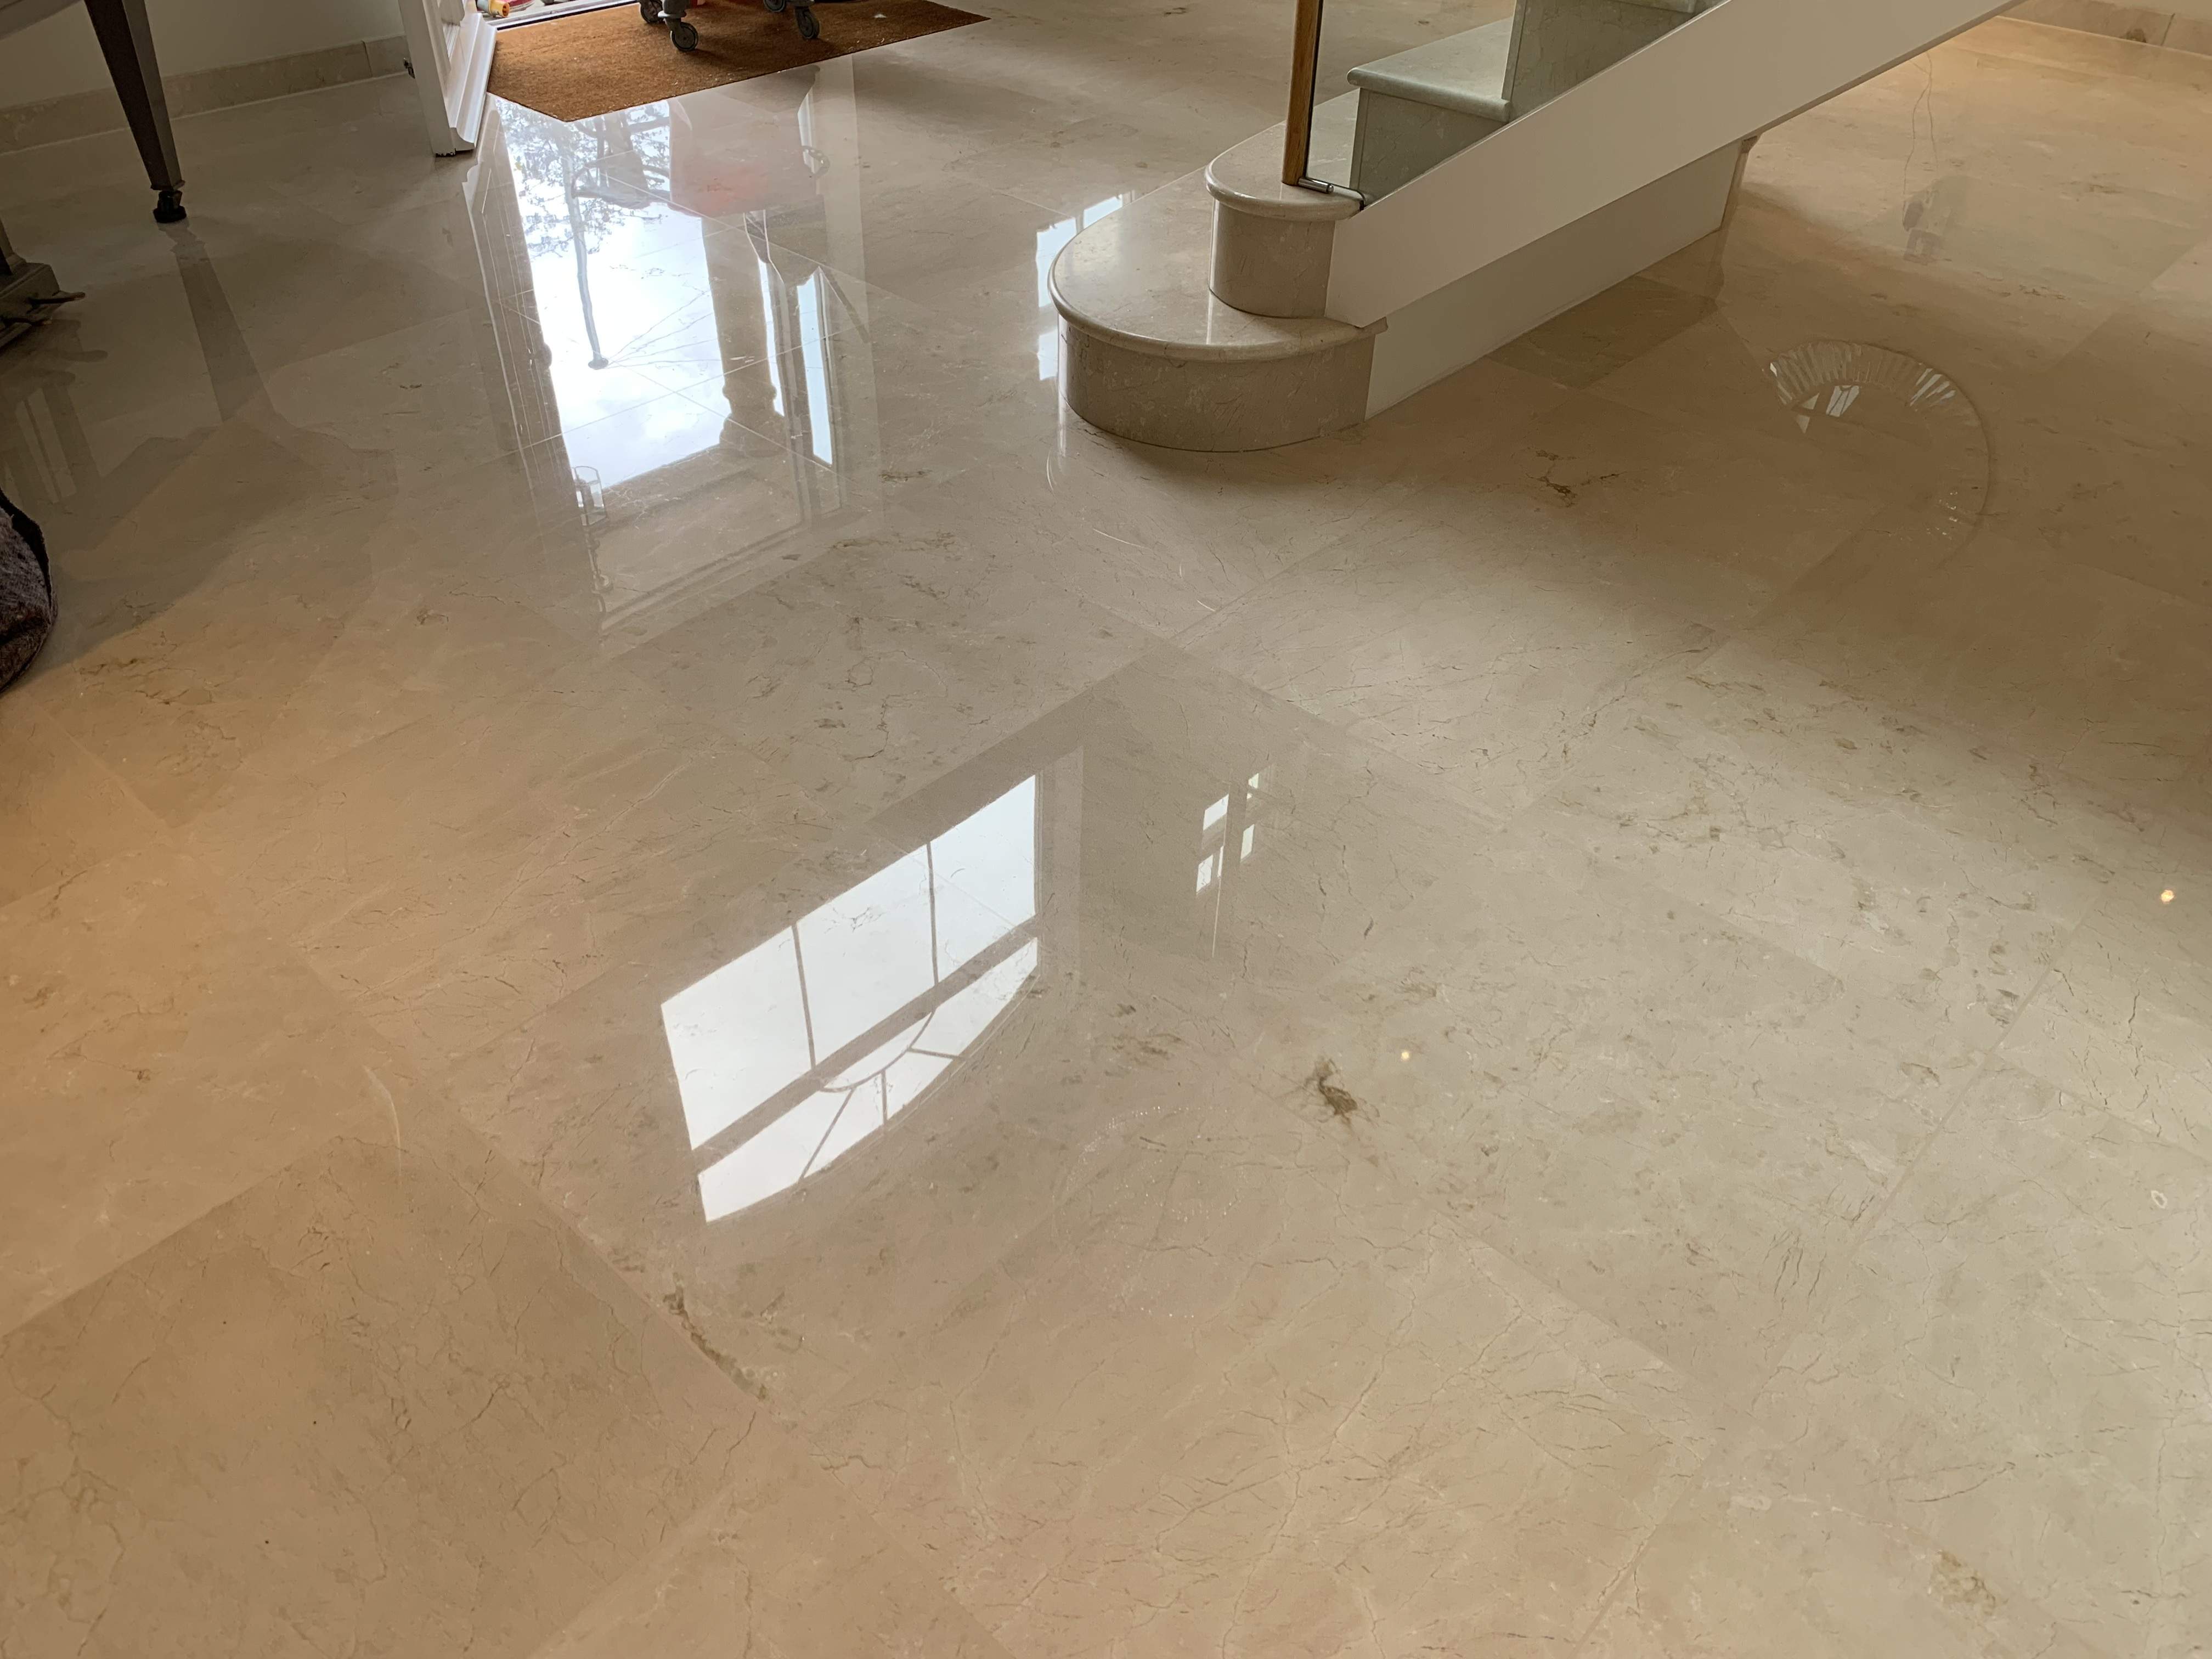 Marble floor after sealing